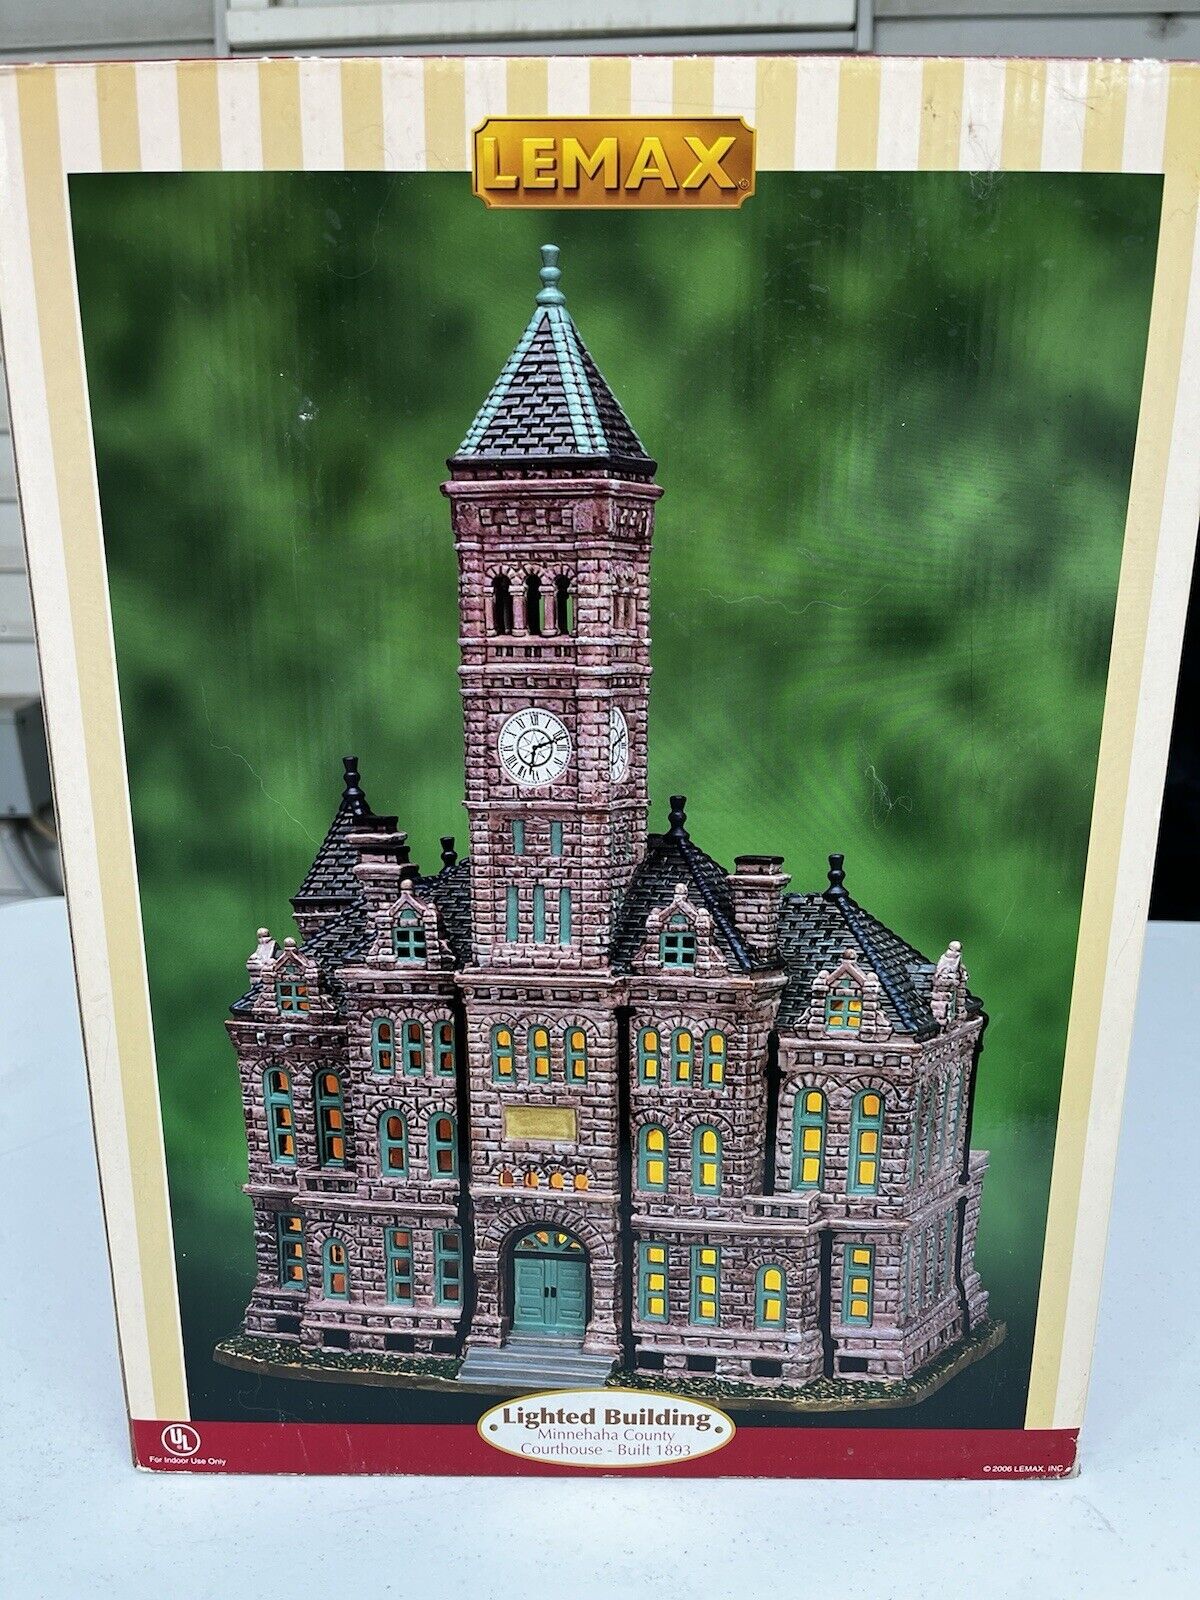 Lemax Lighted building minnehaha county courthouse Built 1893 Christmas Village